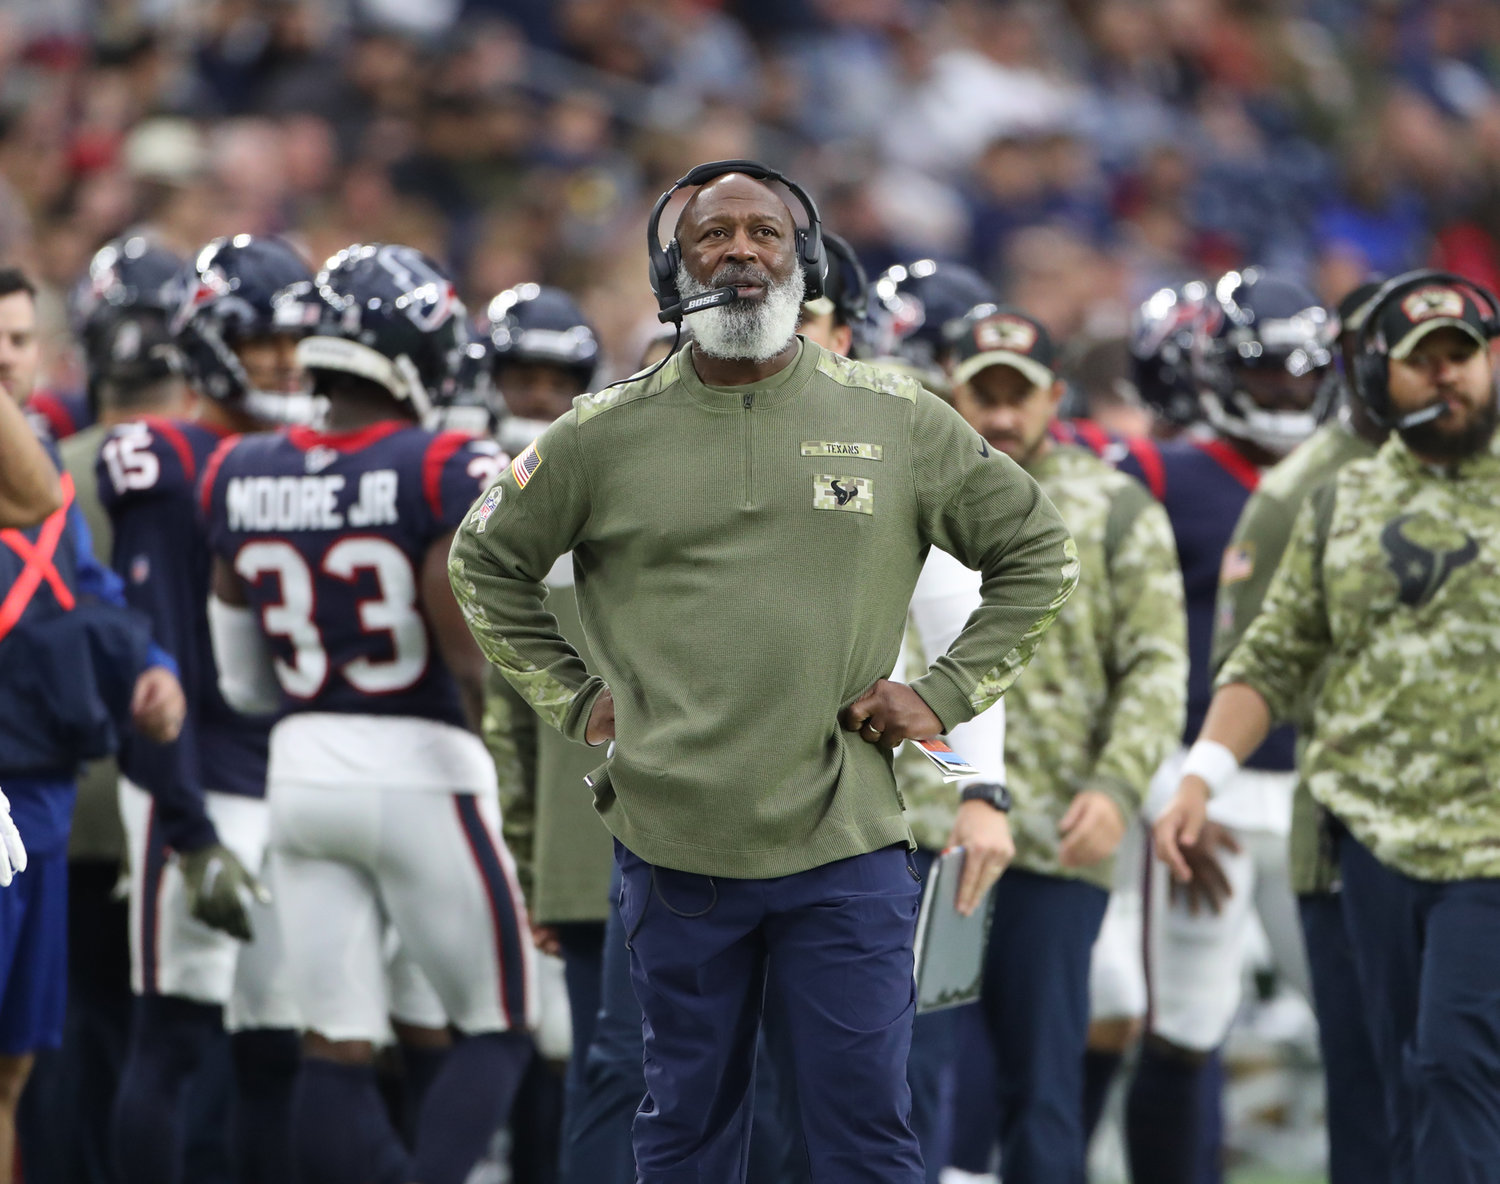 Houston Texans defensive coordinator Lovie Smith during an NFL game between the Houston Texans and the New York Jets on November 28, 2021 in Houston, Texas. The Jets won, 21-14